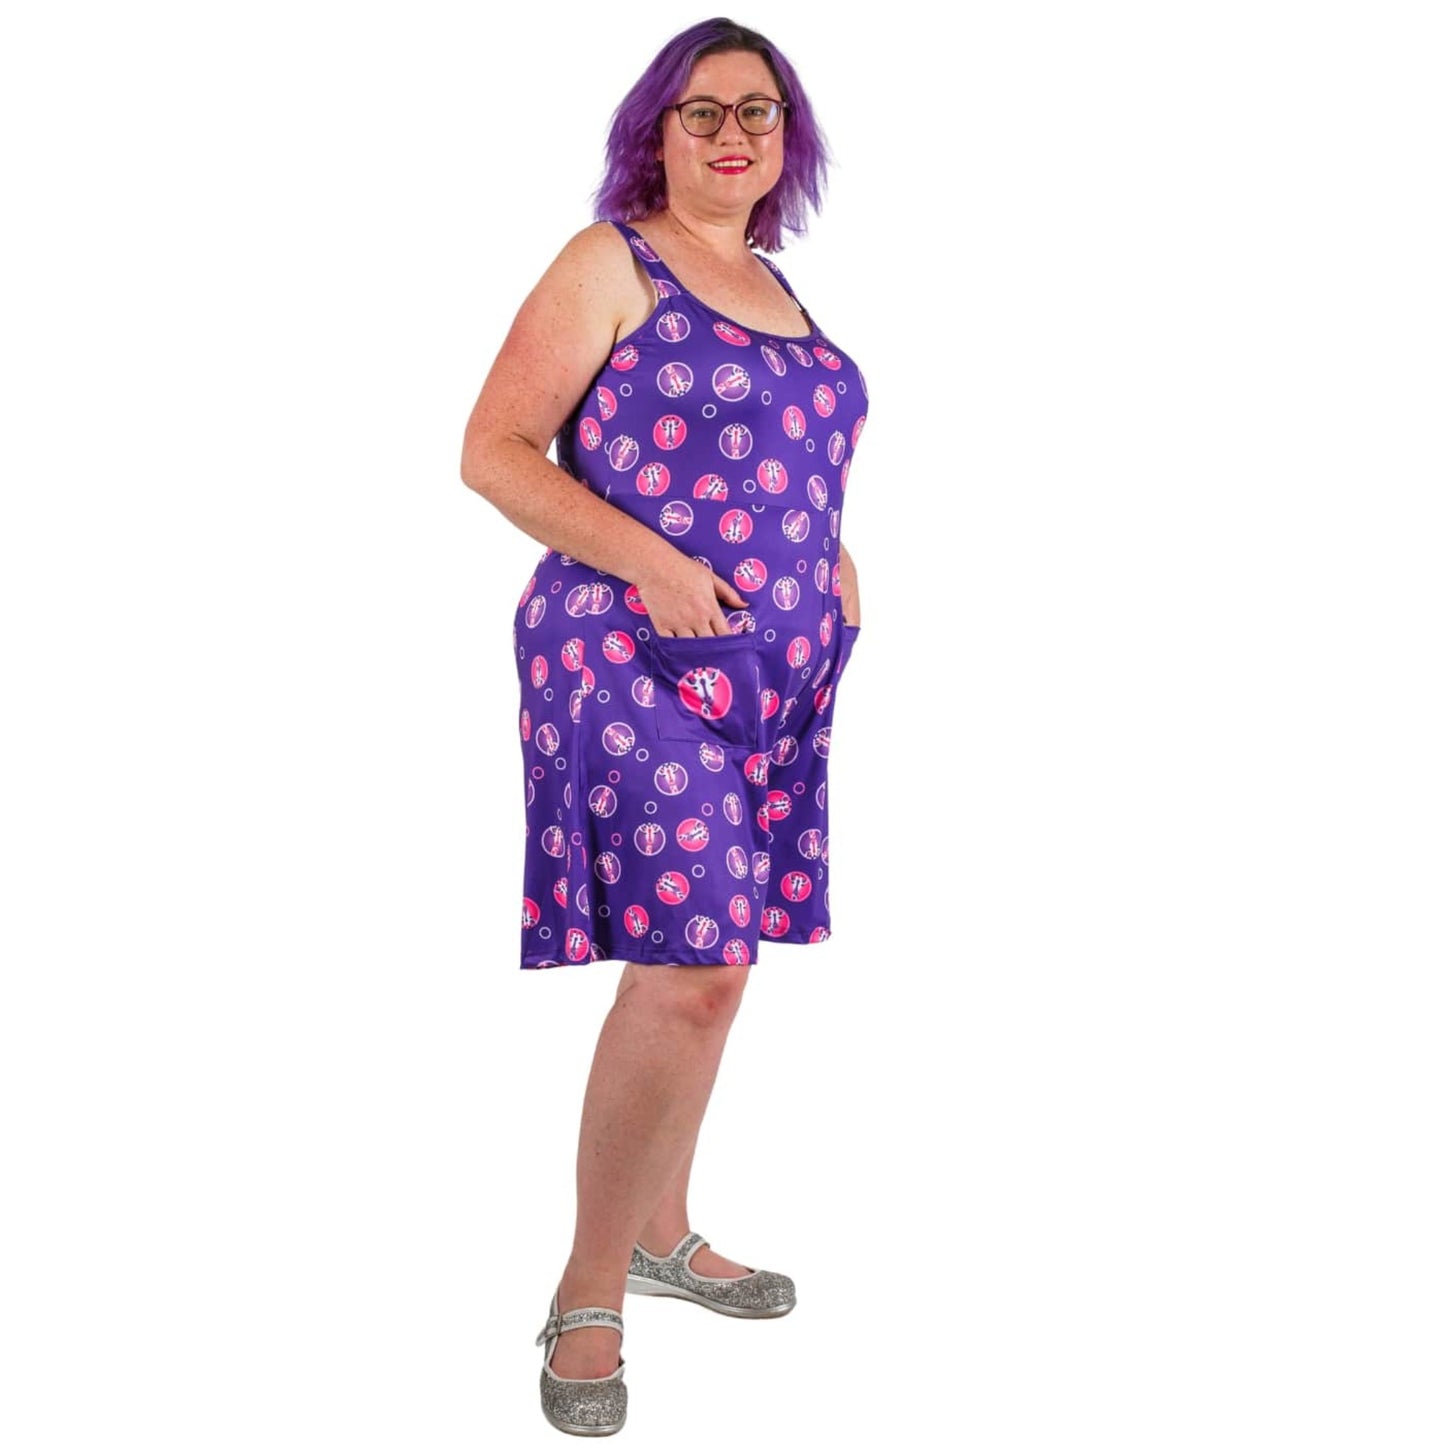 Andy Romper by RainbowsAndFairies.com.au (Giraffe - Pink & Purple - Jungle - Playsuit - Overalls - Shorts - Kitsch - Rockabilly) - SKU: CL_ROMPR_ANDYG_PNK - Pic-05